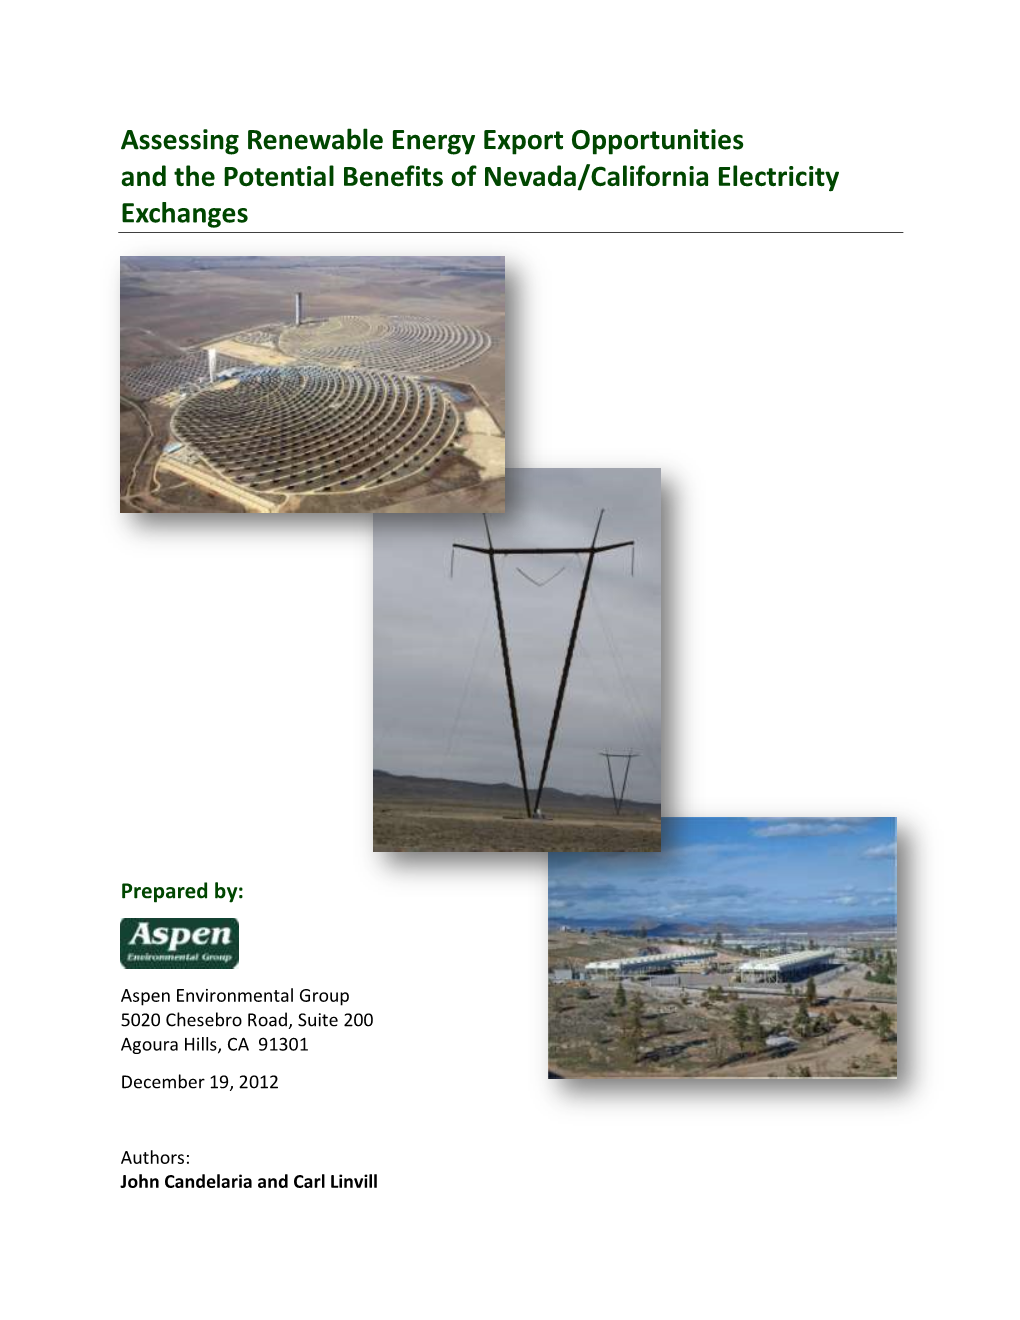 Assessing Renewable Energy Export Opportunities and the Potential Benefits of Nevada/California Electricity Exchanges